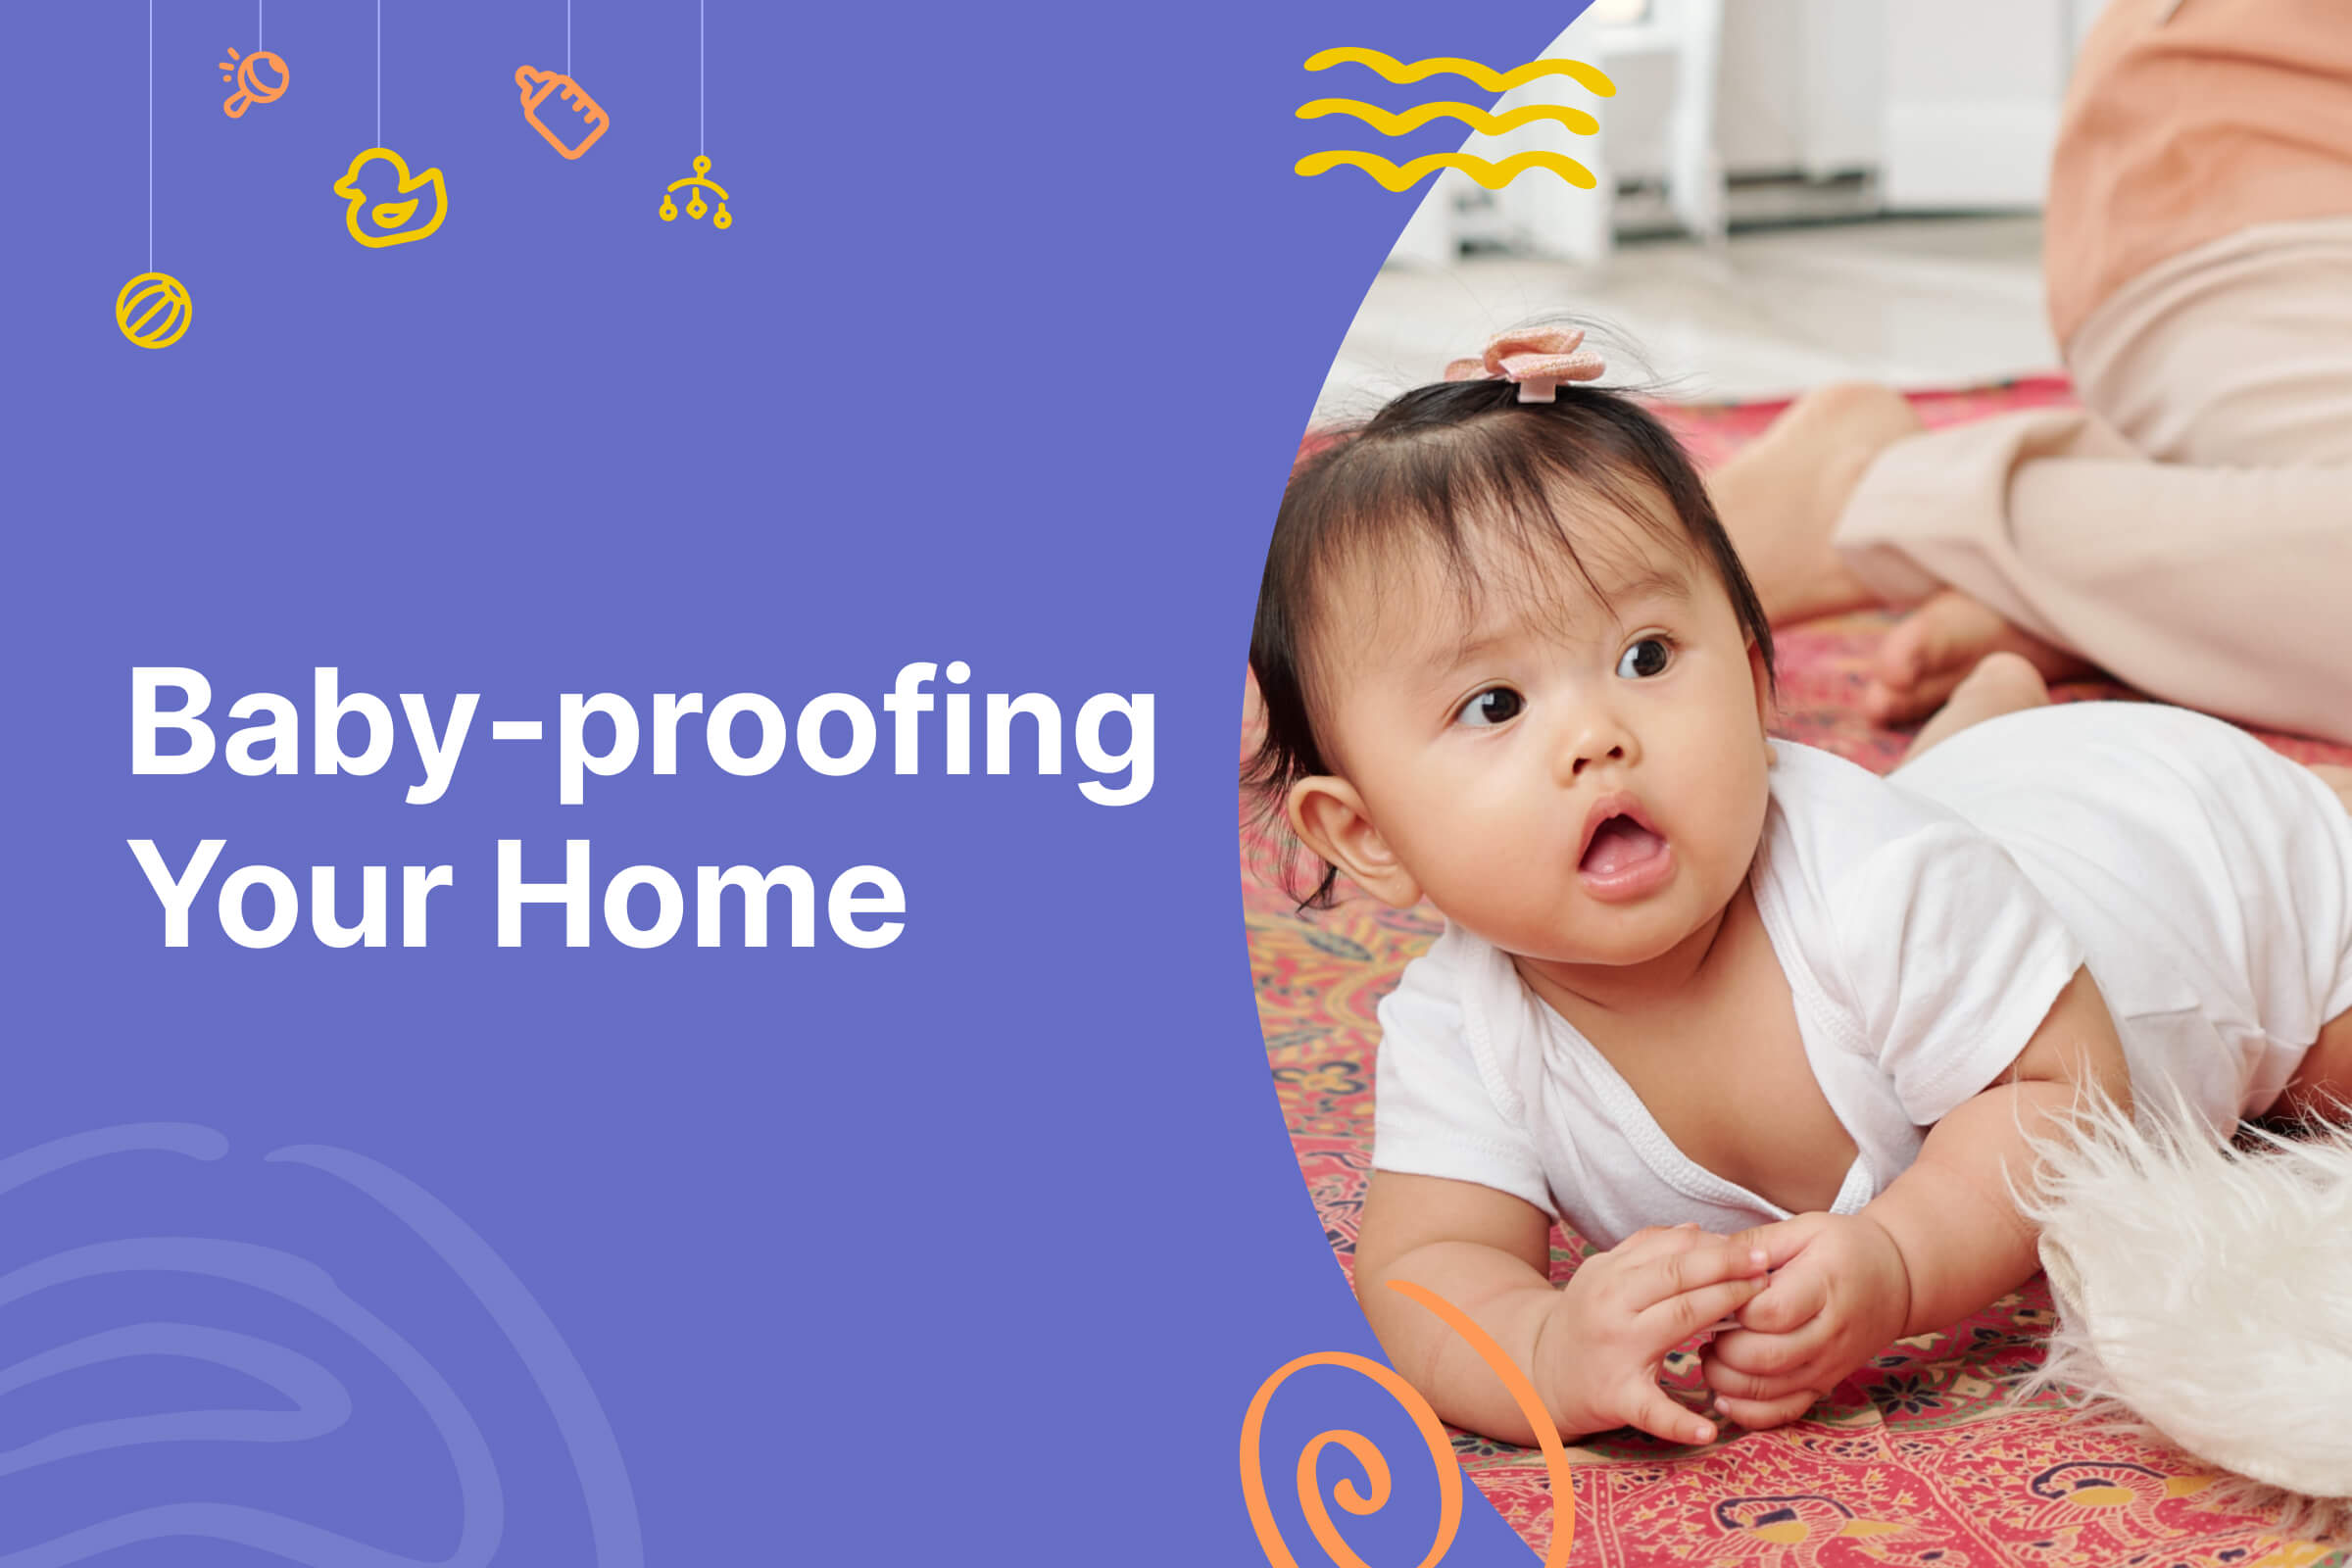 Thumbnail of baby proofing your home